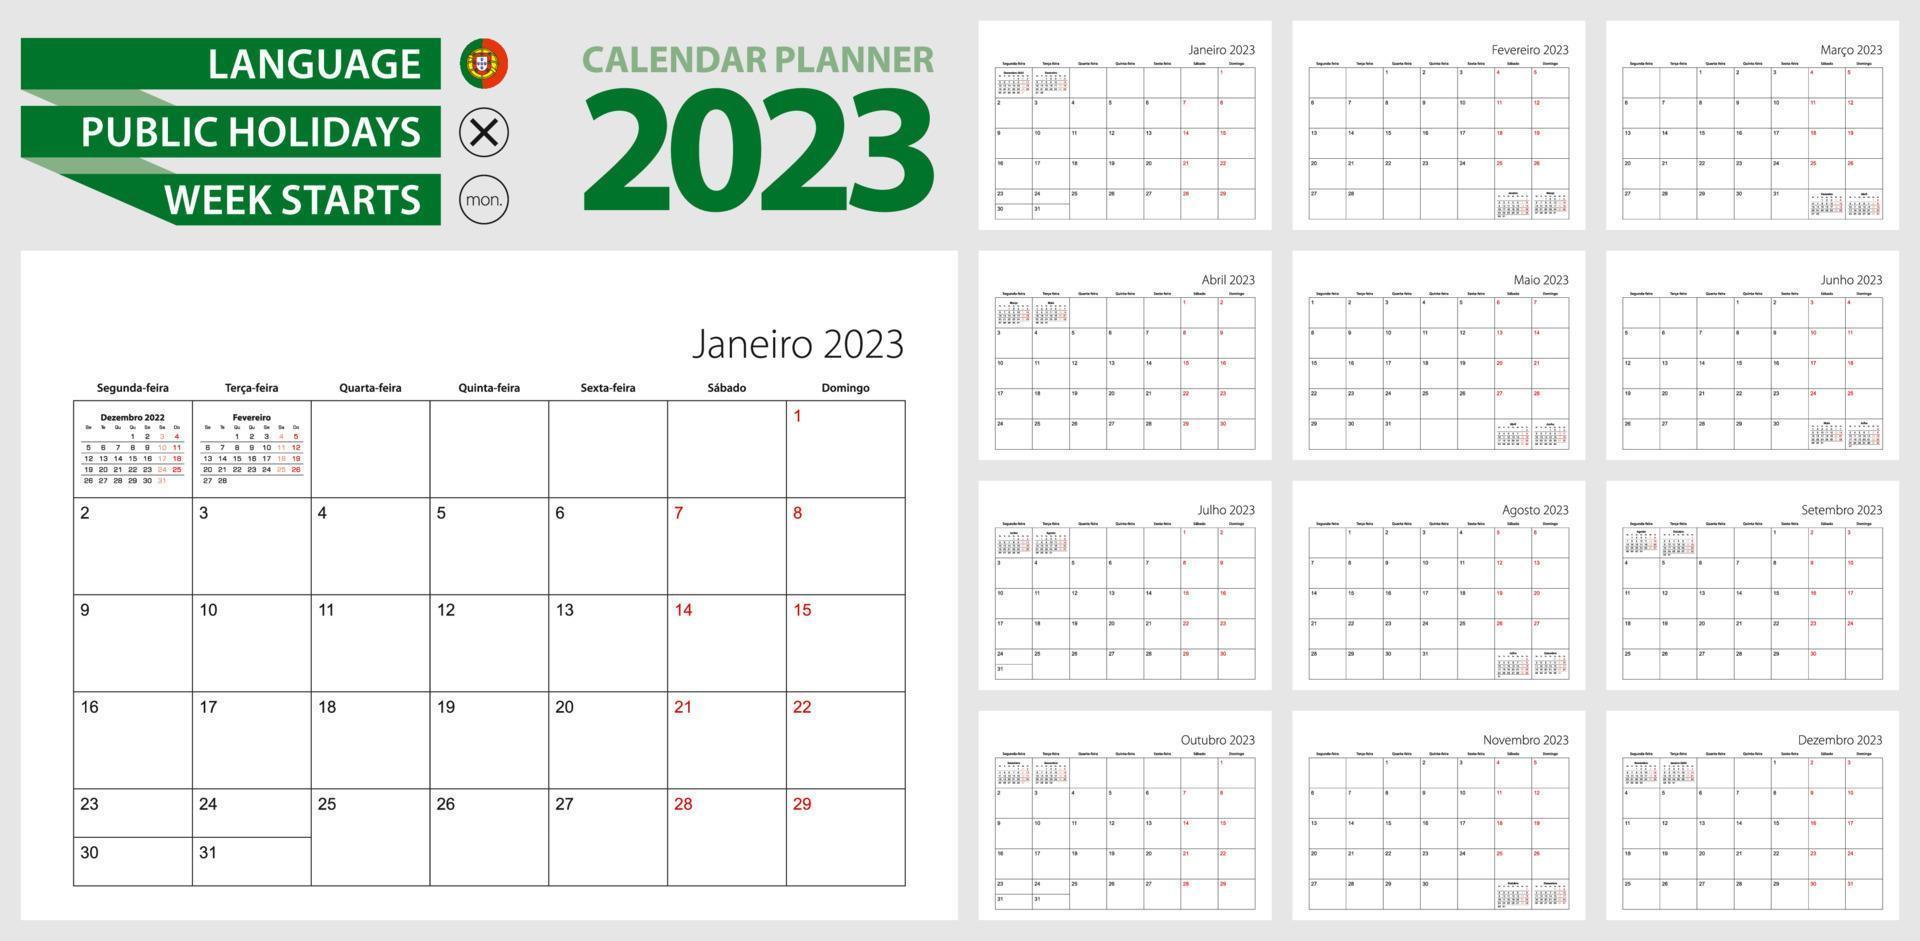 Portuguese calendar planner for 2023. Portuguese language, week starts from Monday. vector